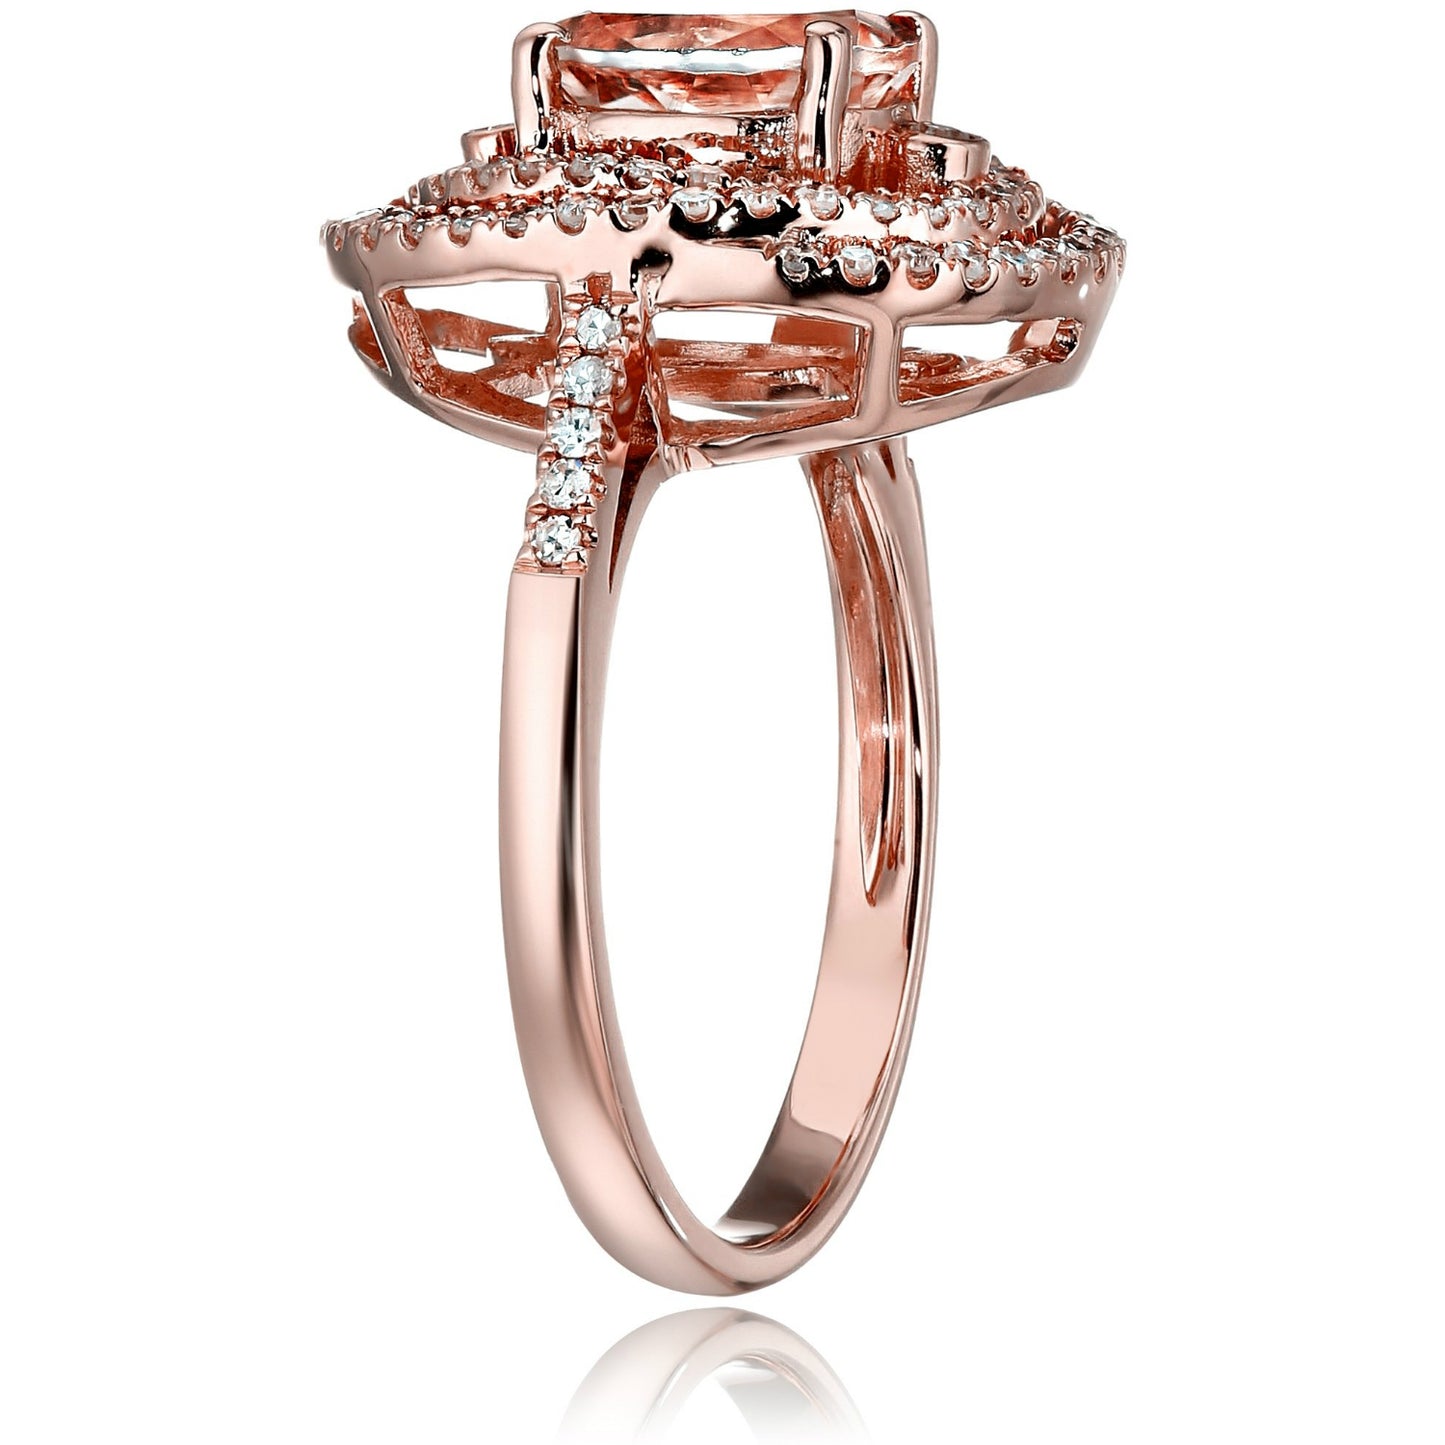 10k Rose Gold Morganite and Diamond Double Swirl Halo Oval Engagement Ring (1/3cttw, H-I Color, I1-I2 Clarity), - pinctore